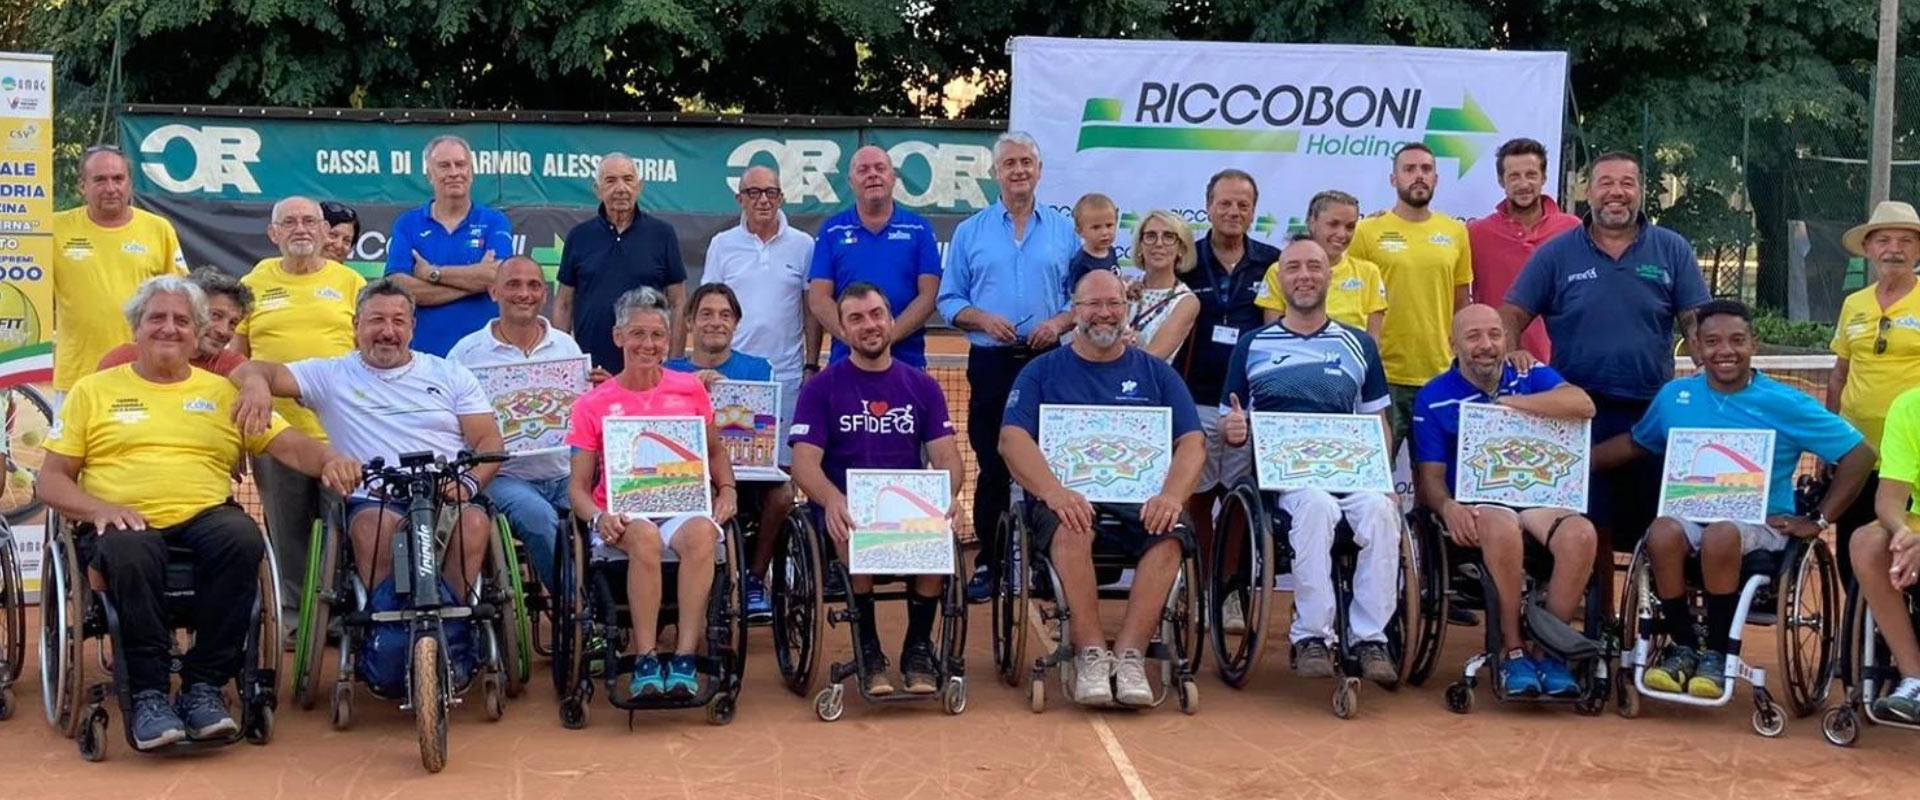 Supporting the wheelchair tennis tournament